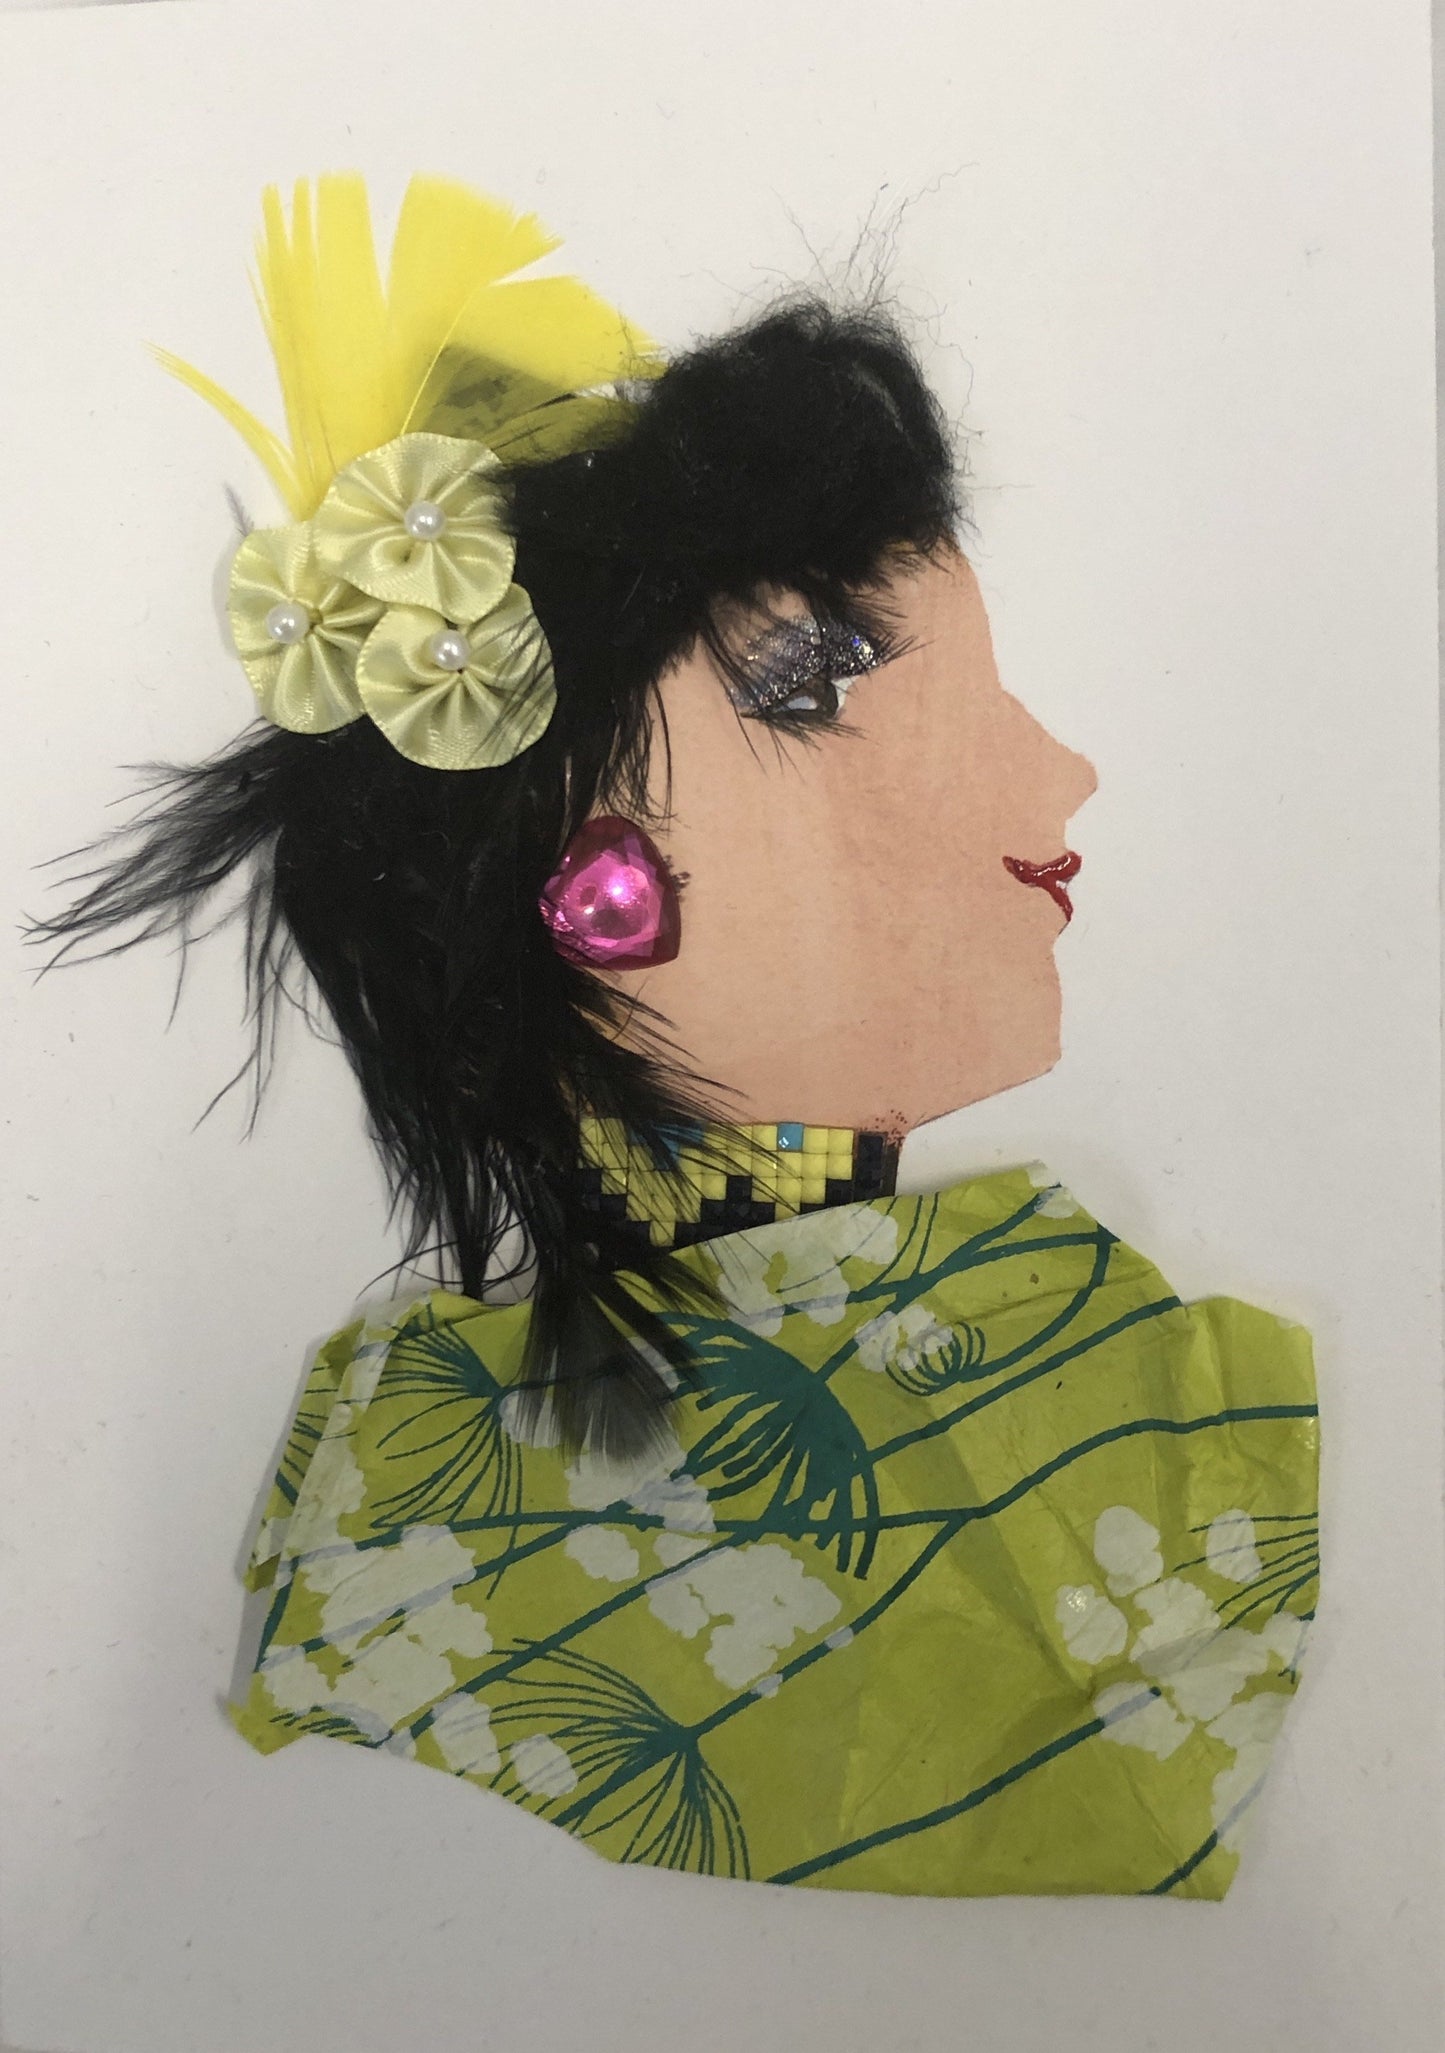 This card has been given the name Chelsea Chick. Chelsea wears a green blouse with a cherry blossom pattern on it. In her black hair she wears a yellow flower with a yellow feather behind it, and a pink heart gem earring. 